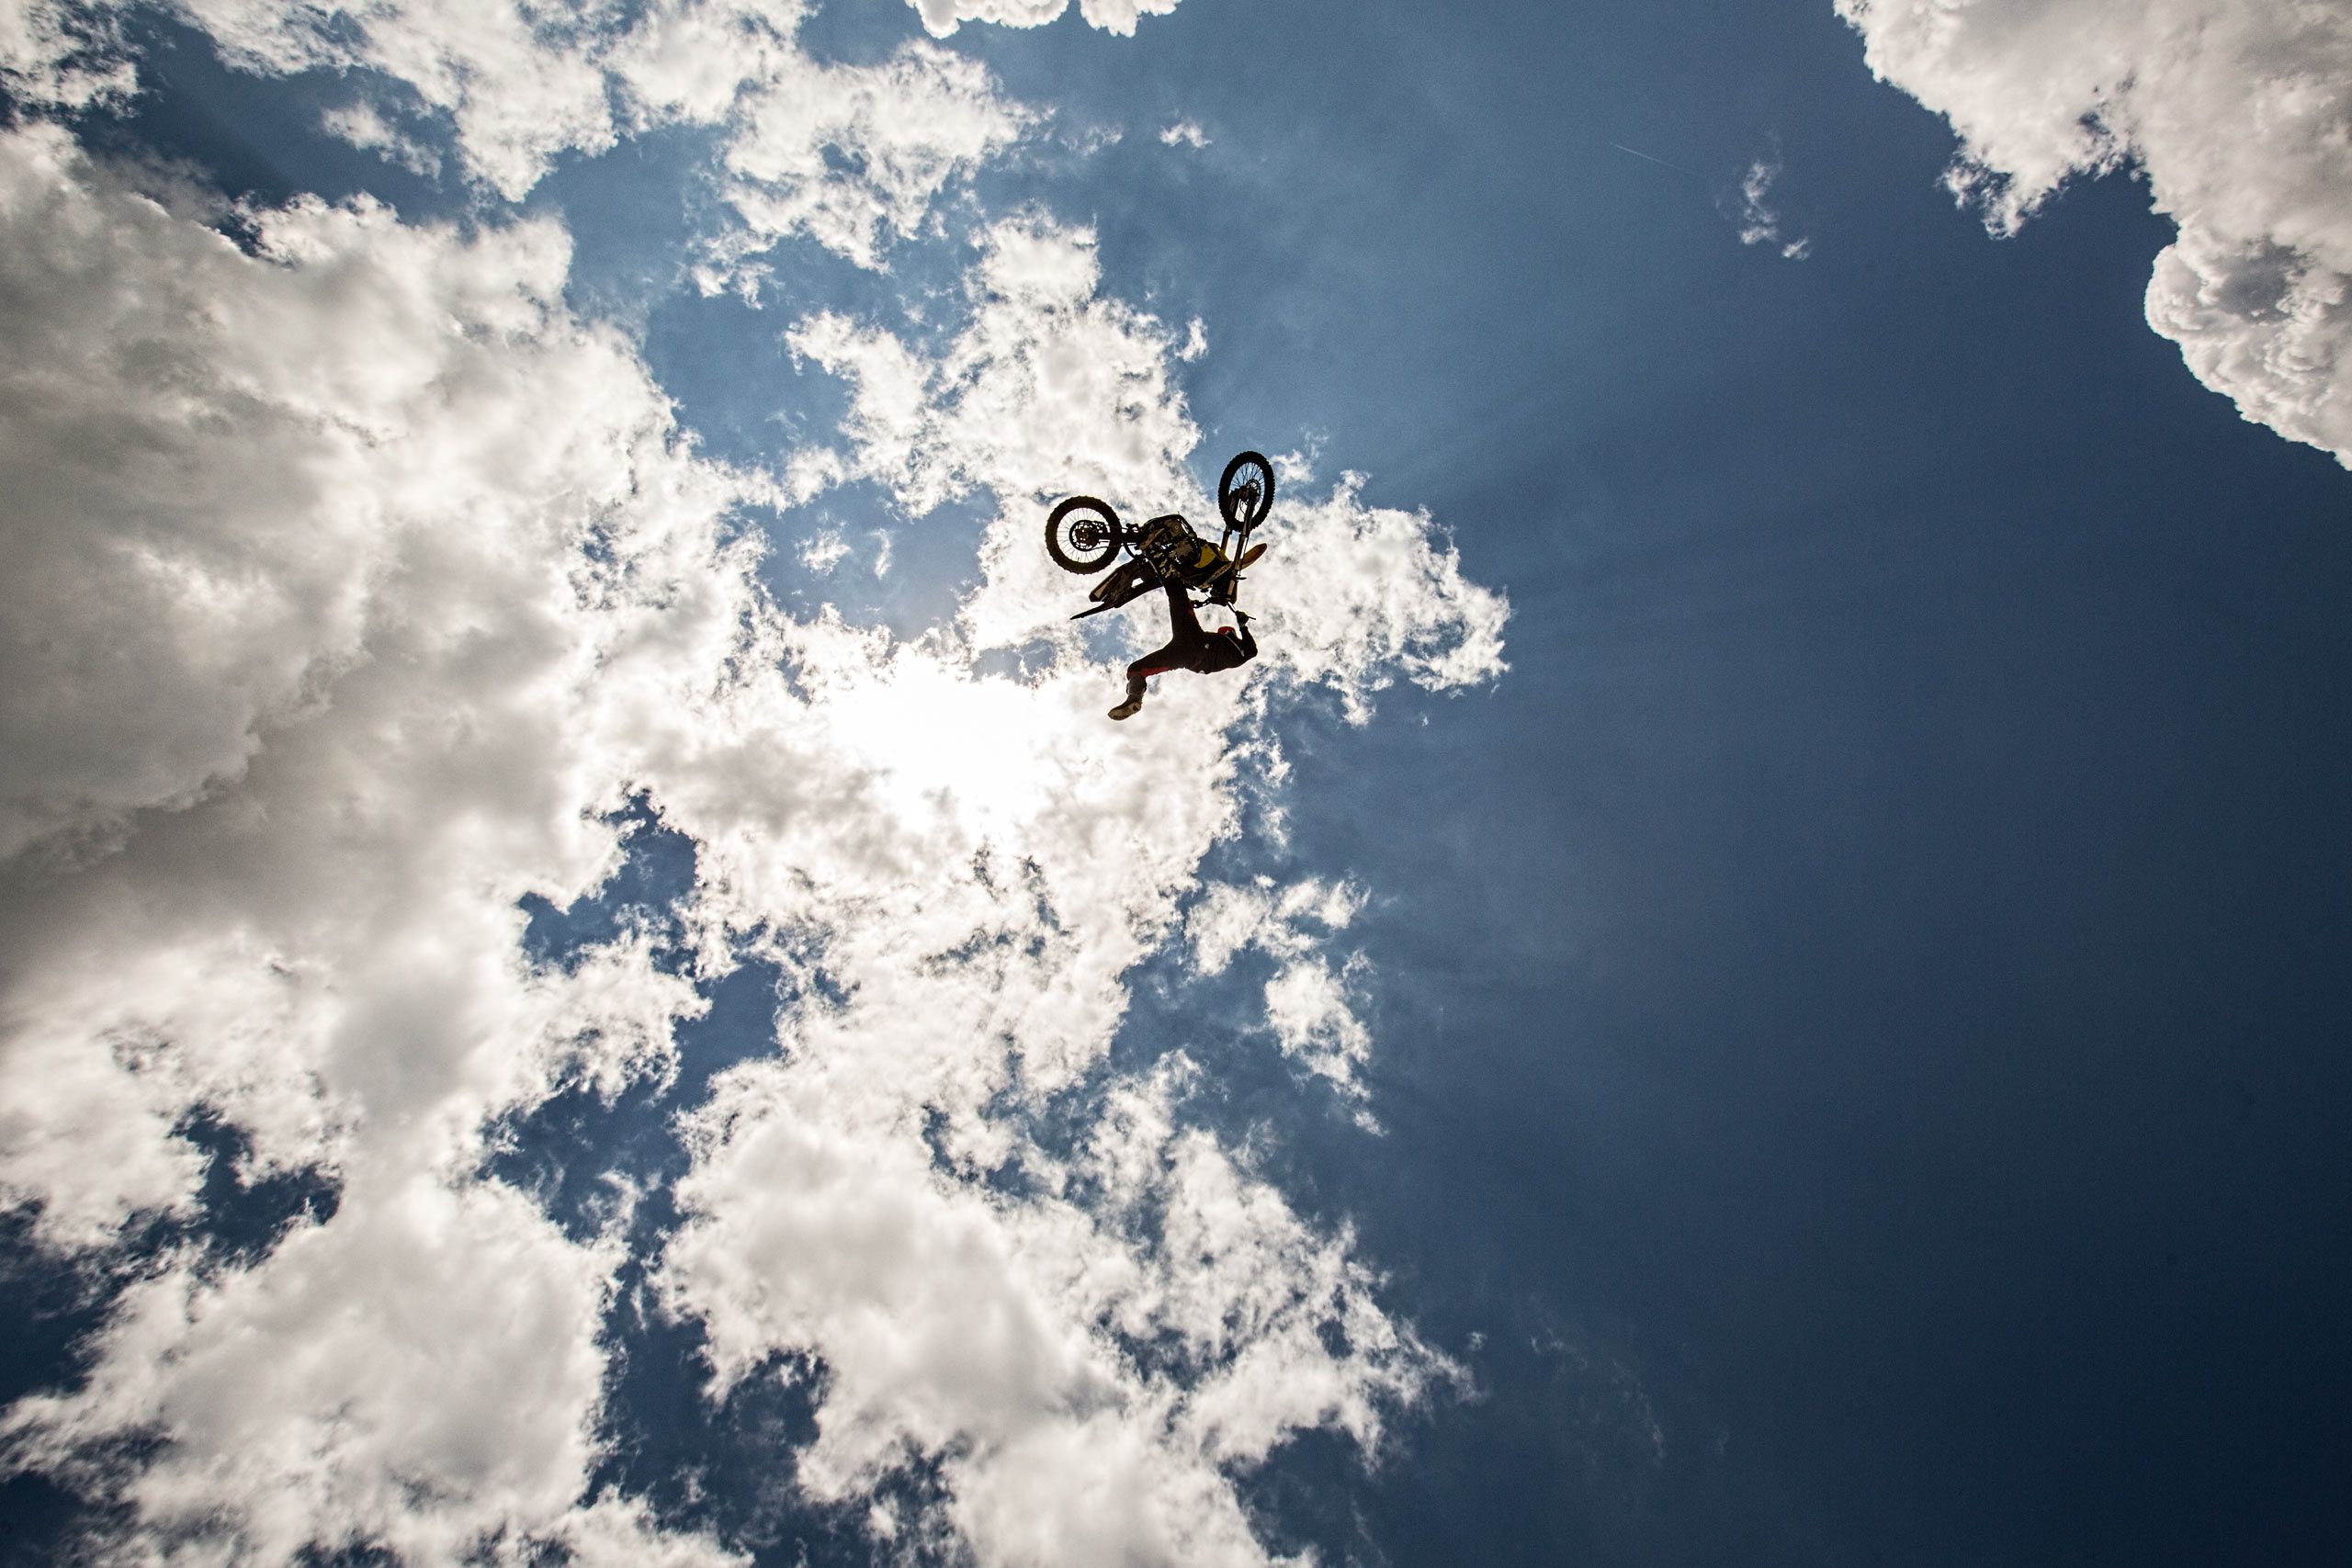 Motorcycle Performing a Stunt Sky High